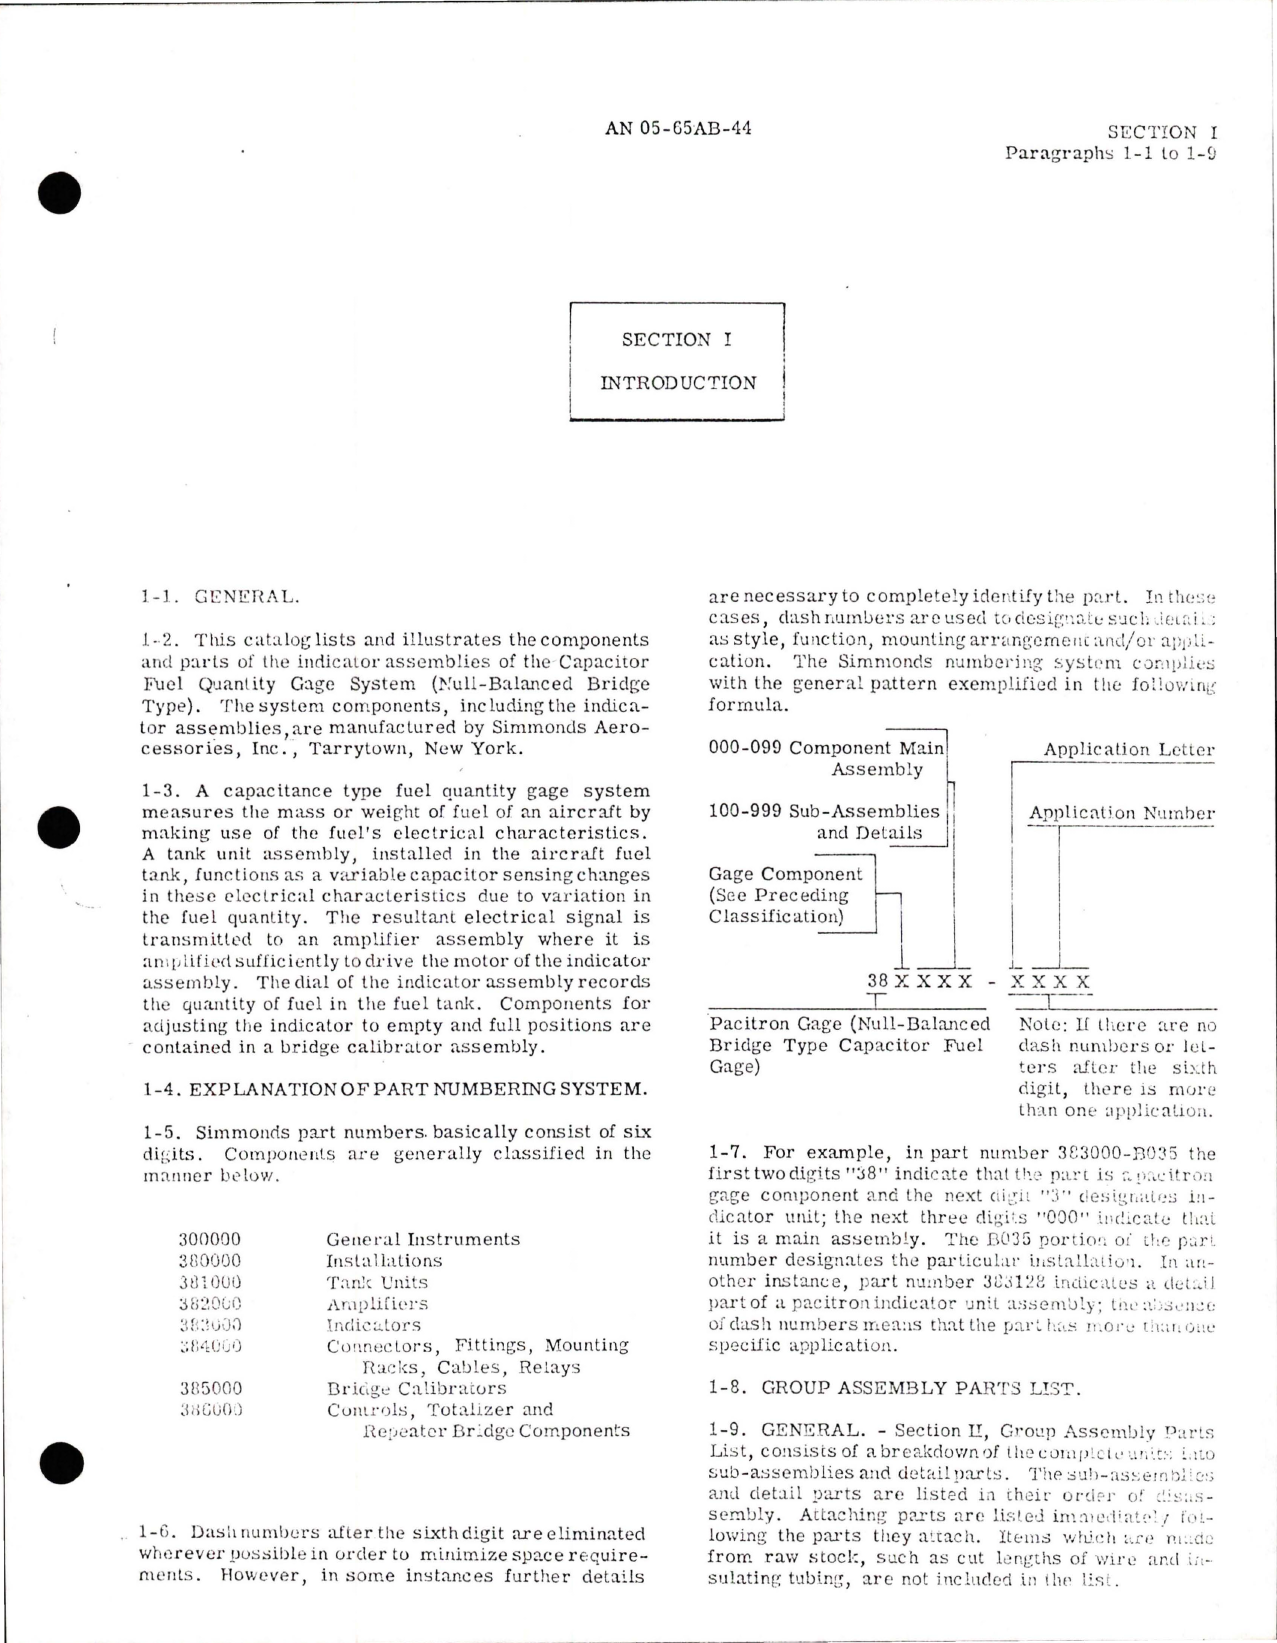 Sample page 7 from AirCorps Library document: Capacitor Fuel Gage System Indicator Assemblies